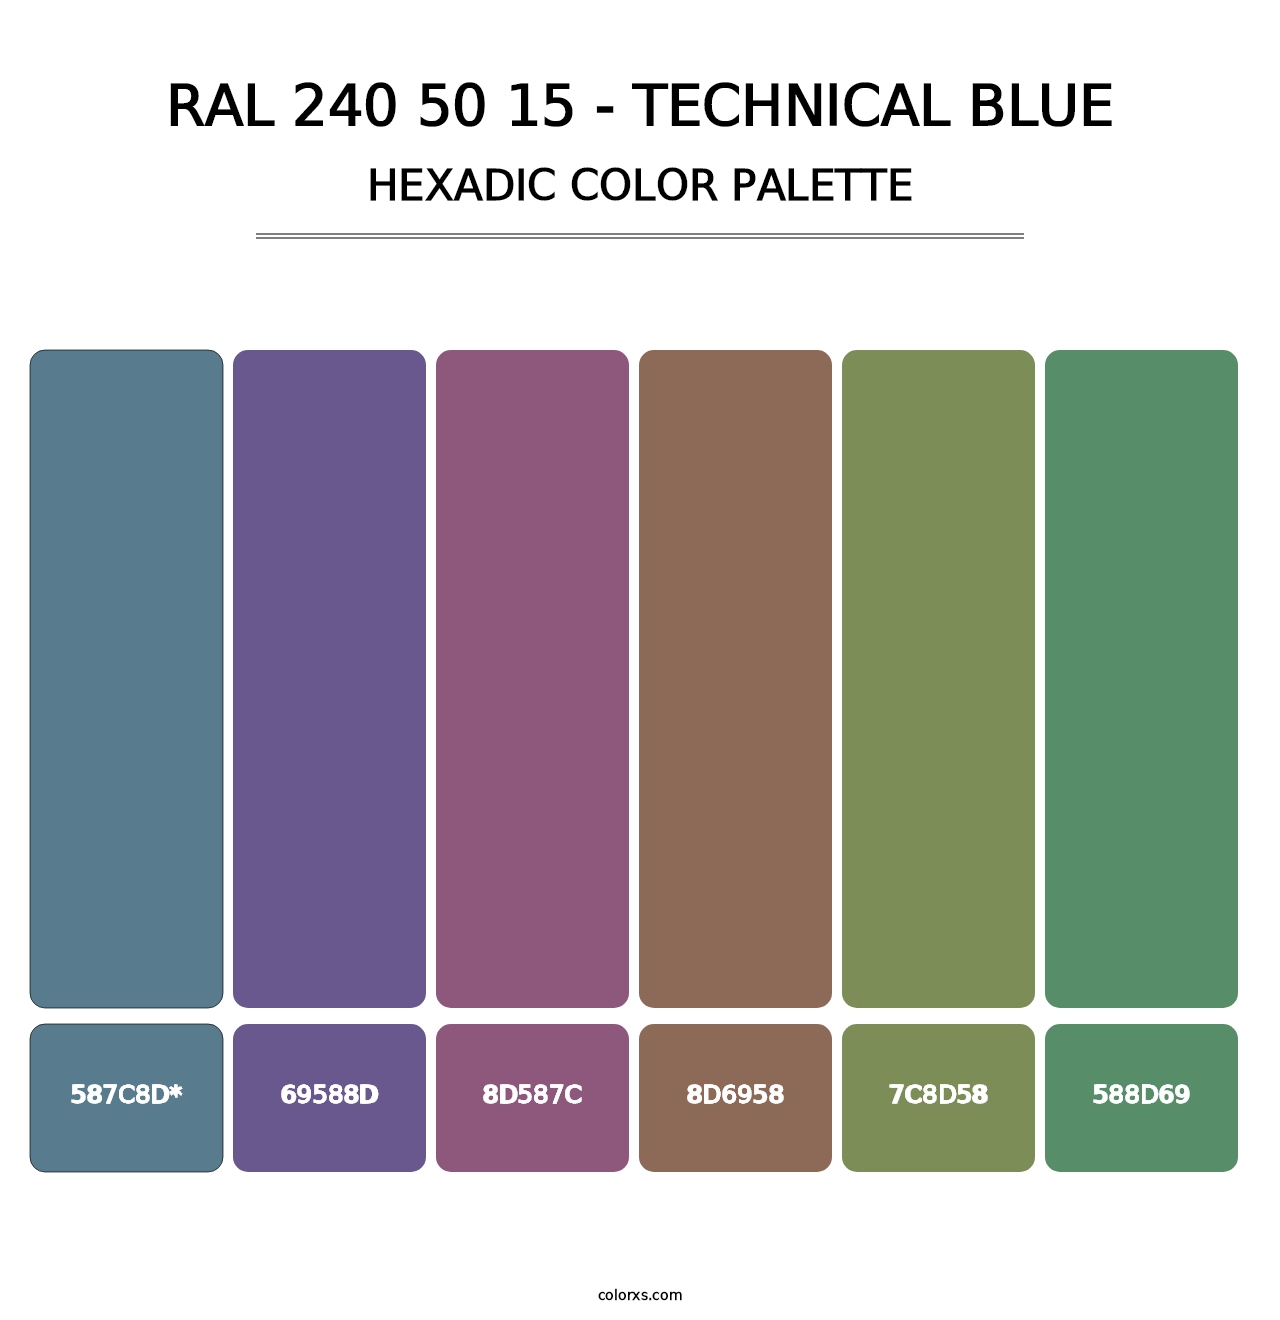 RAL 240 50 15 - Technical Blue - Hexadic Color Palette